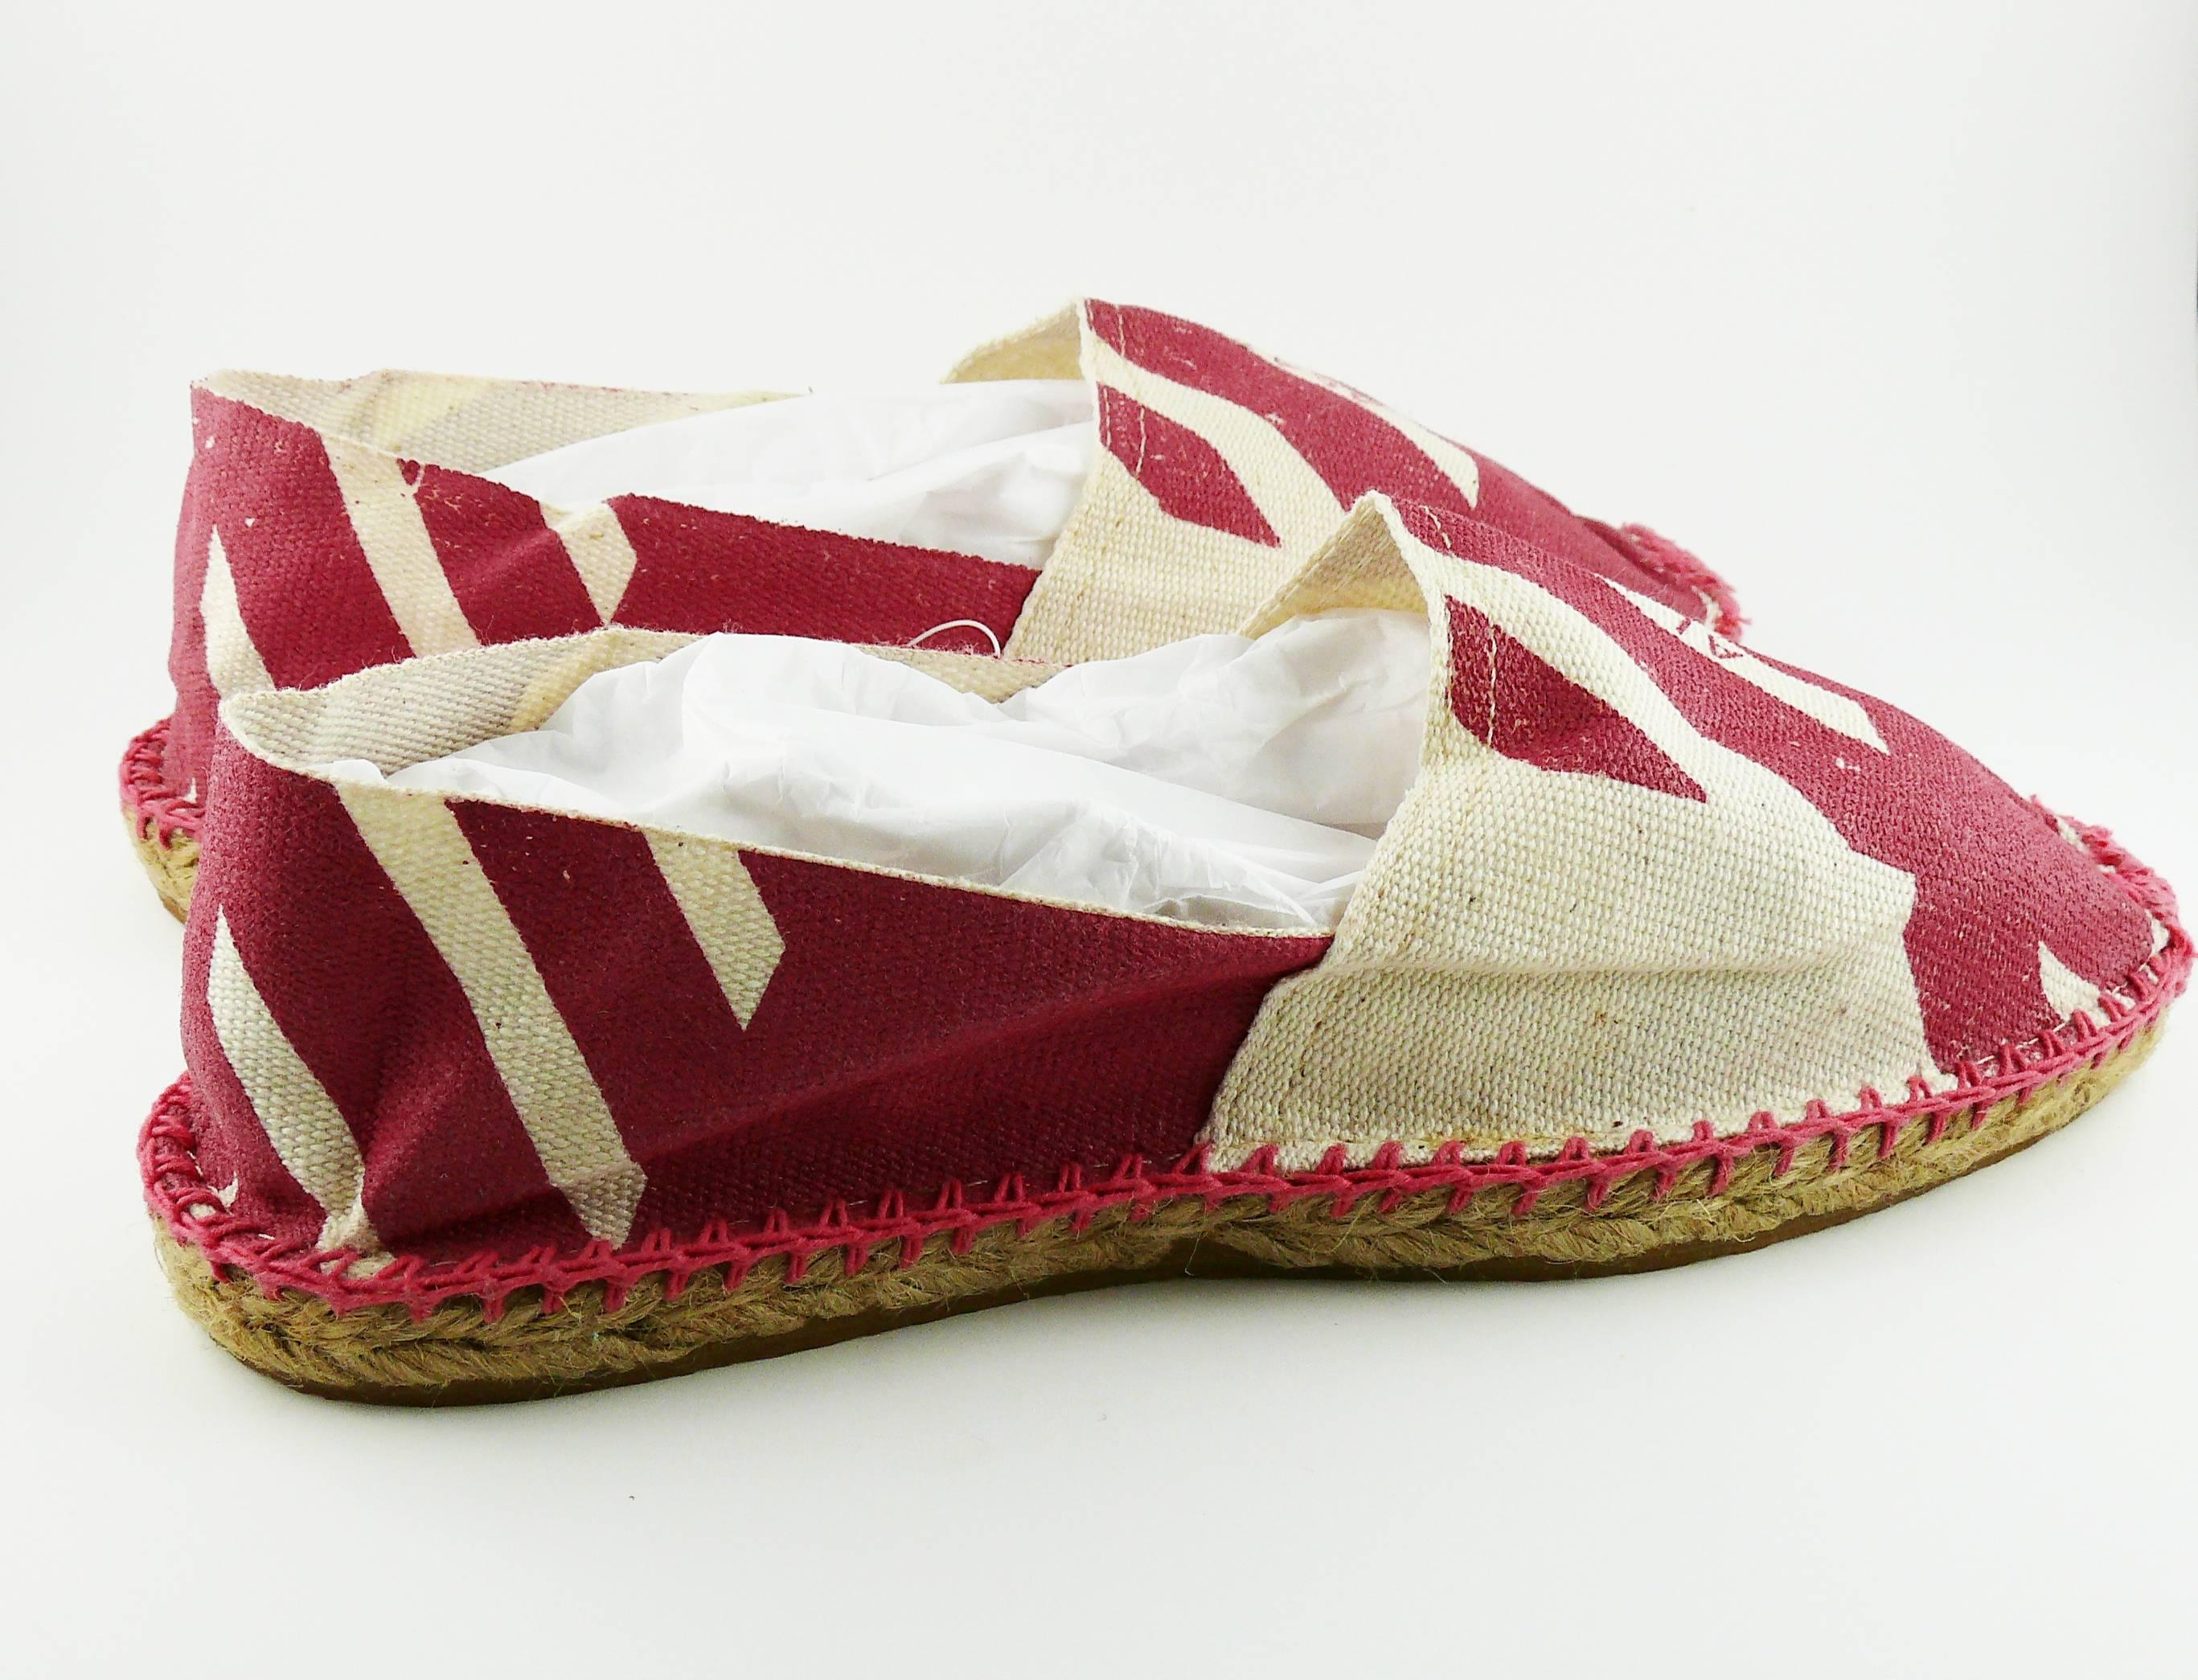 ALAIA for TATI early 1990s iconic pink and off-white hound's tooth canvas espadrilles. 

Unworn condition (including flaws).

A very rare and collectable find !

Fashion designer AZZEDINE ALAIA worked for TATI in the early 90's and contributed